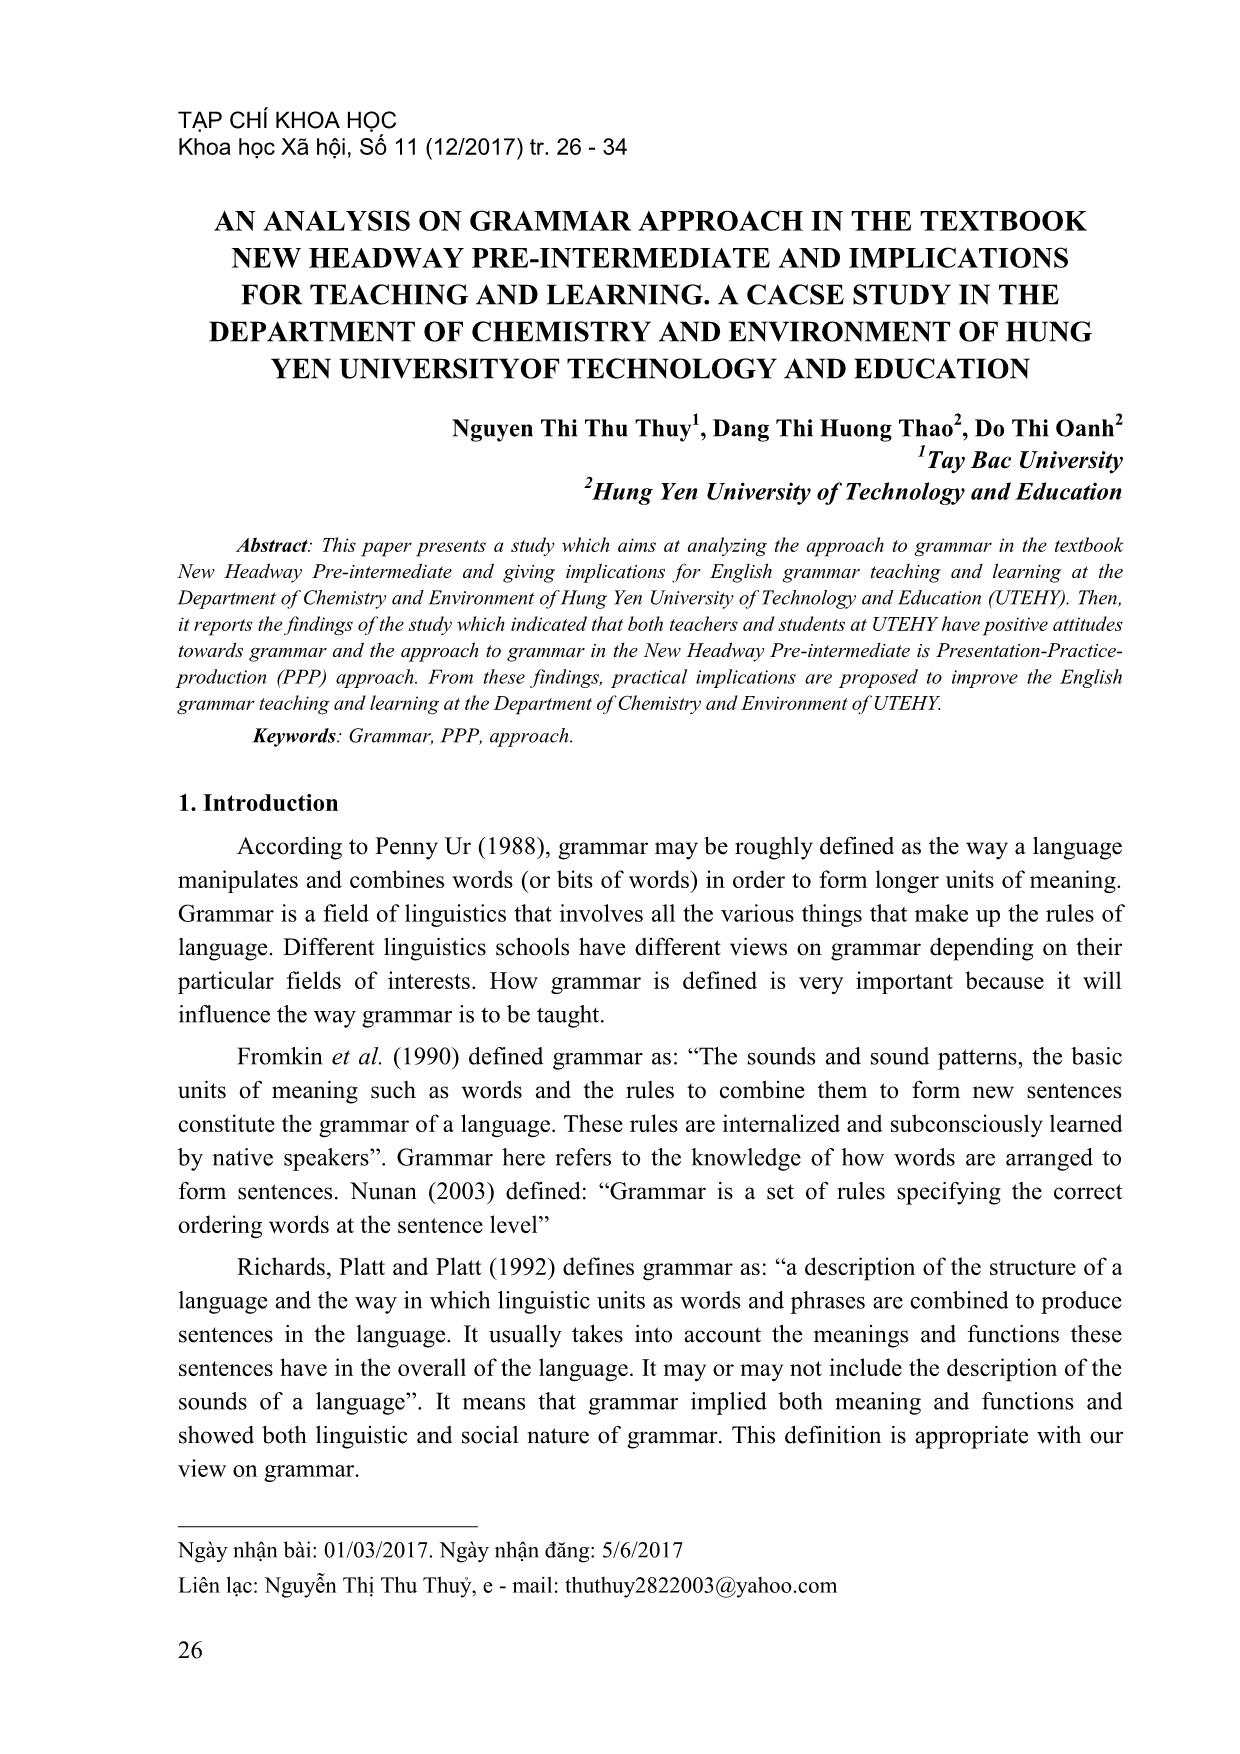 An analysis on grammar approach in the textbook new headway pre-Intermediate and implications for teaching and learning. A cacse study in the department of chemistry and environment of Hung Yen universityof technology and education trang 1